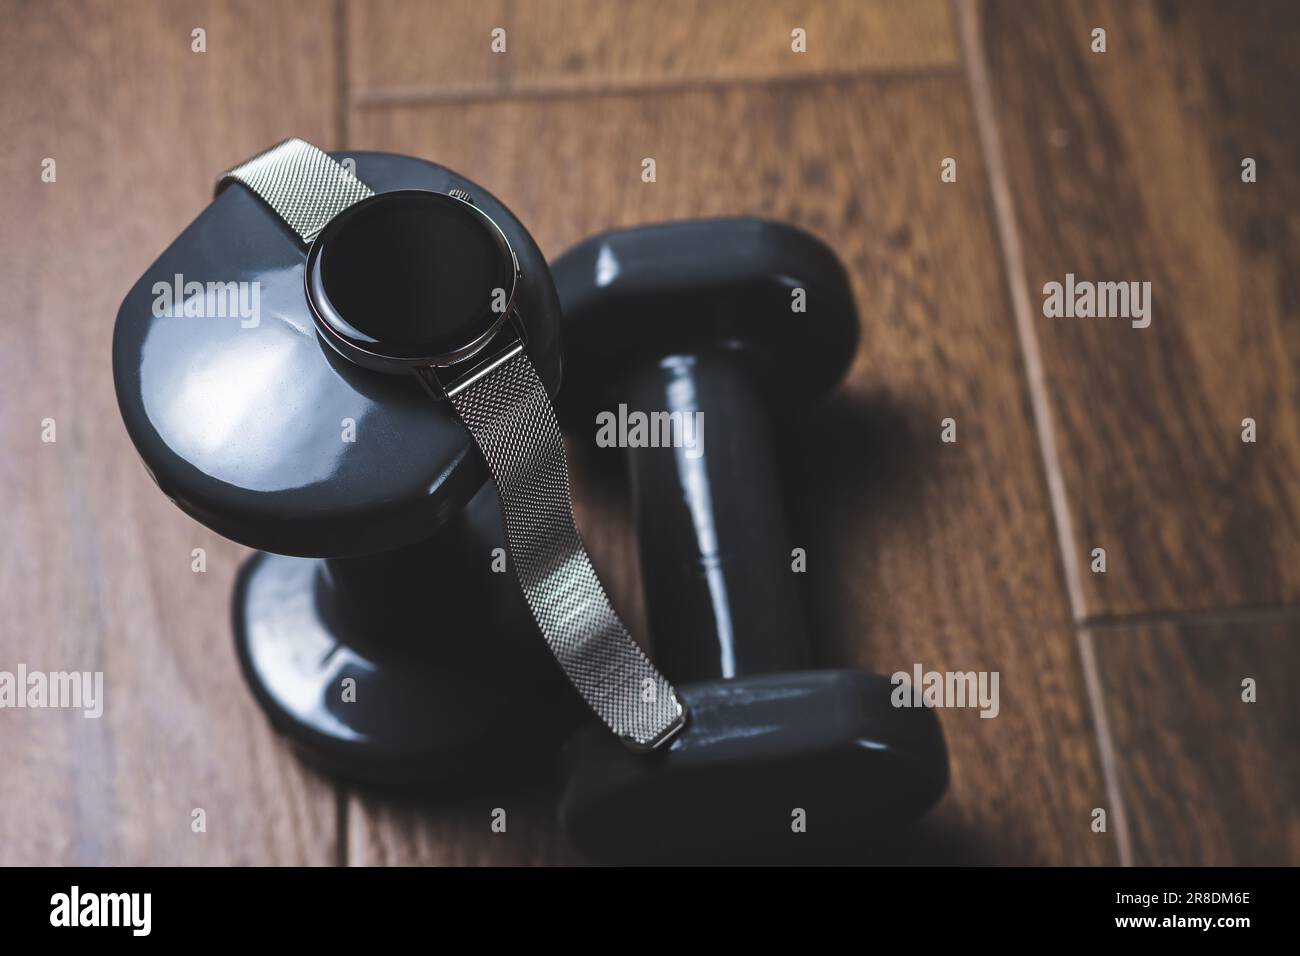 Rhythm and Determination: A smartwatch stands out on top of dumbbells placed on a wooden floor, inspiring motivation and the drive needed to achieve Stock Photo